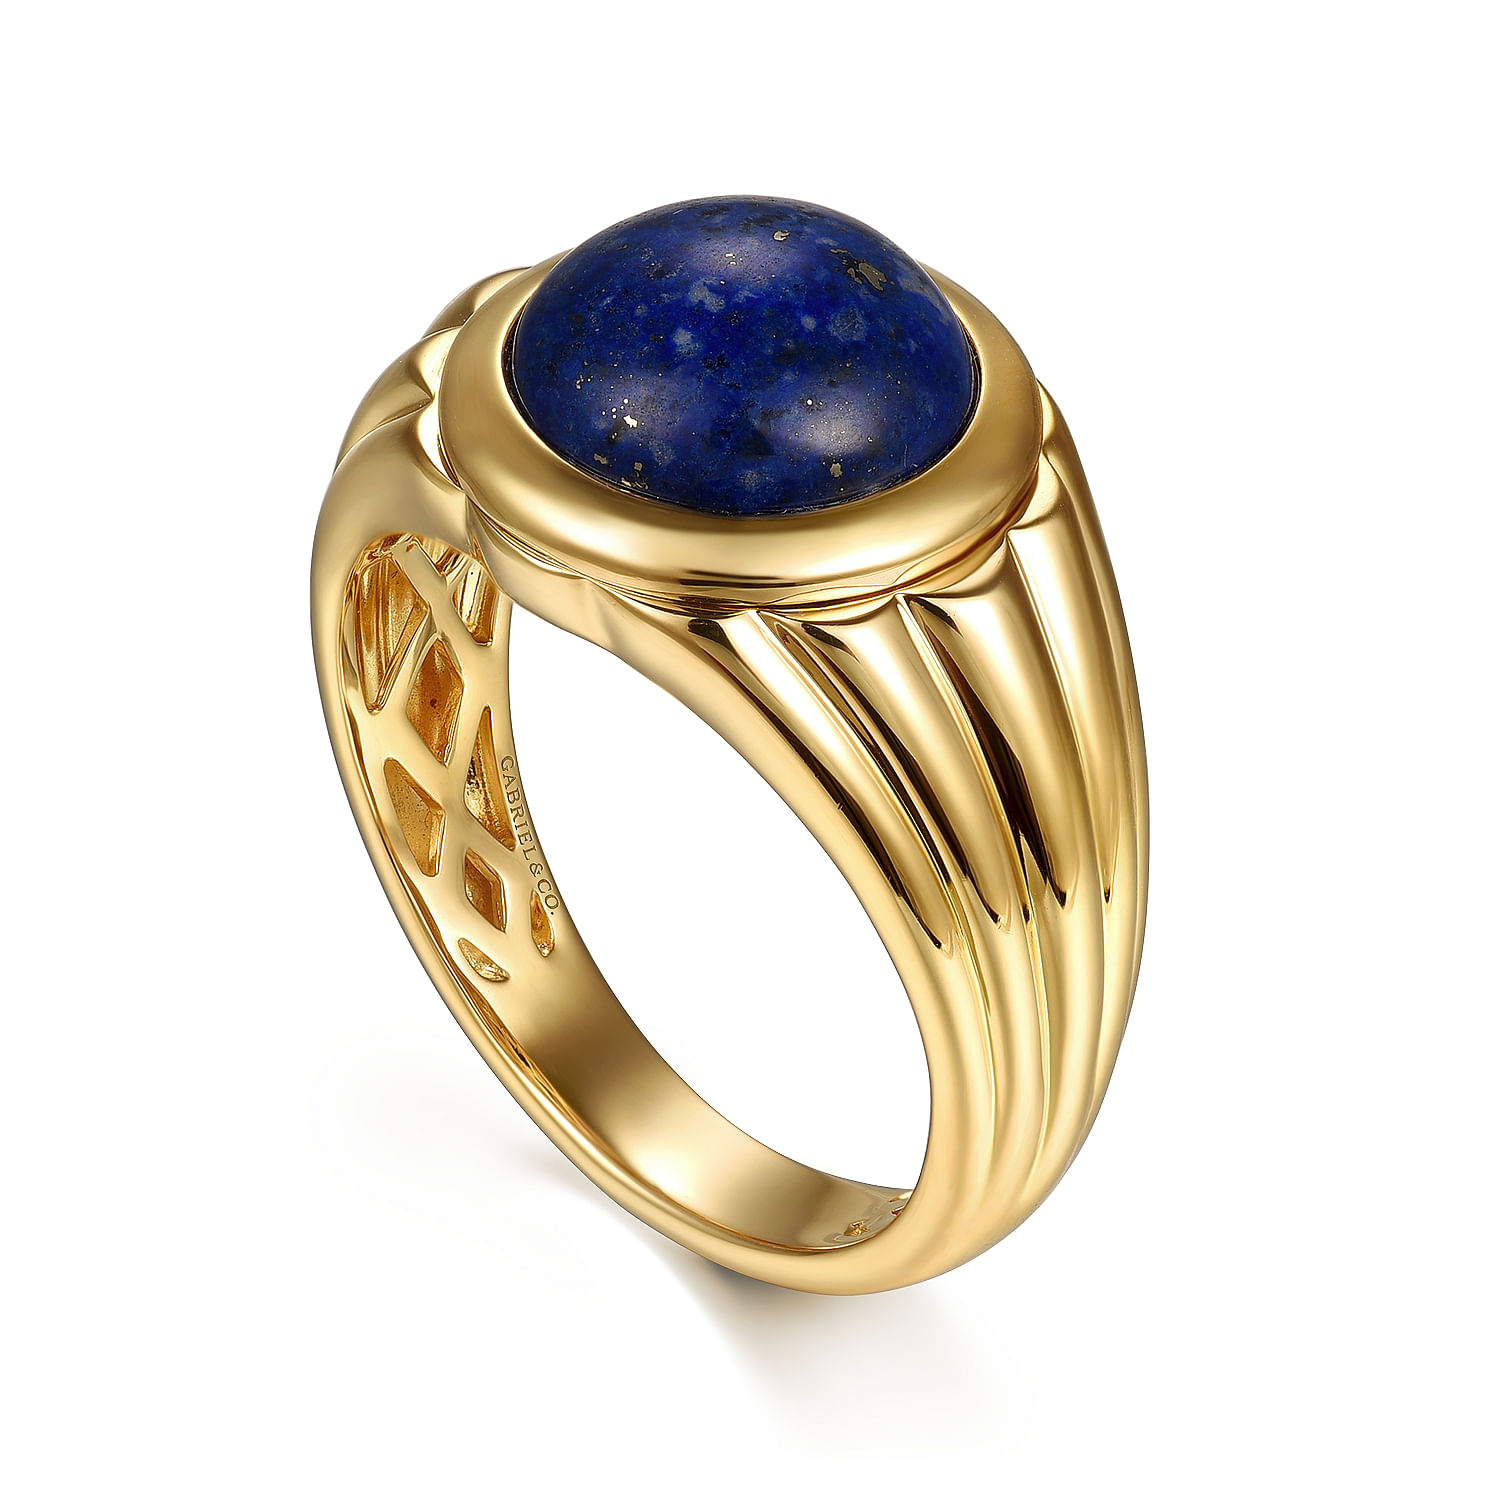 Wide 14K Yellow Gold Lapis Mens Ring in High Polished Finish